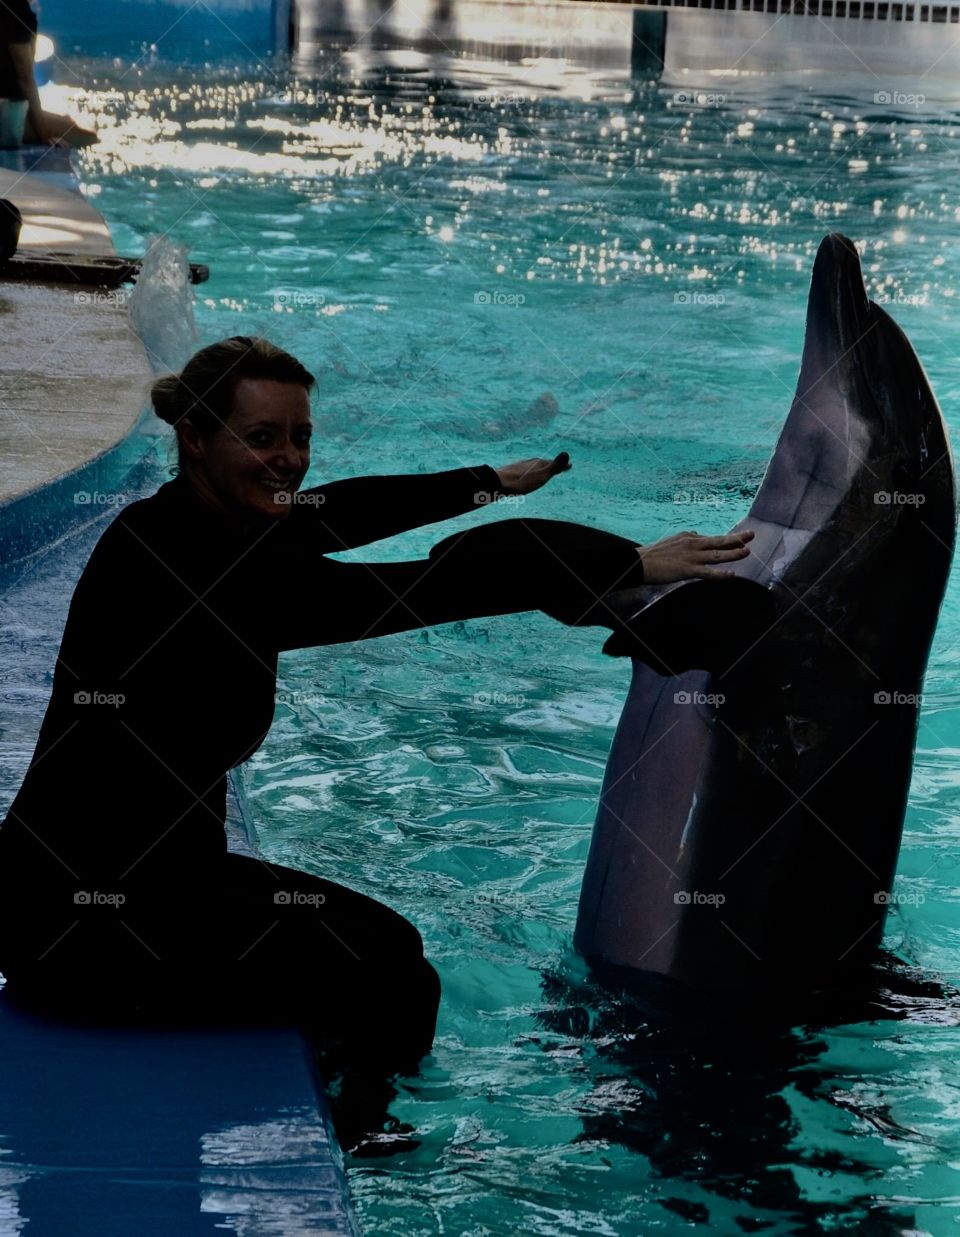 Swimming with the dolphins.